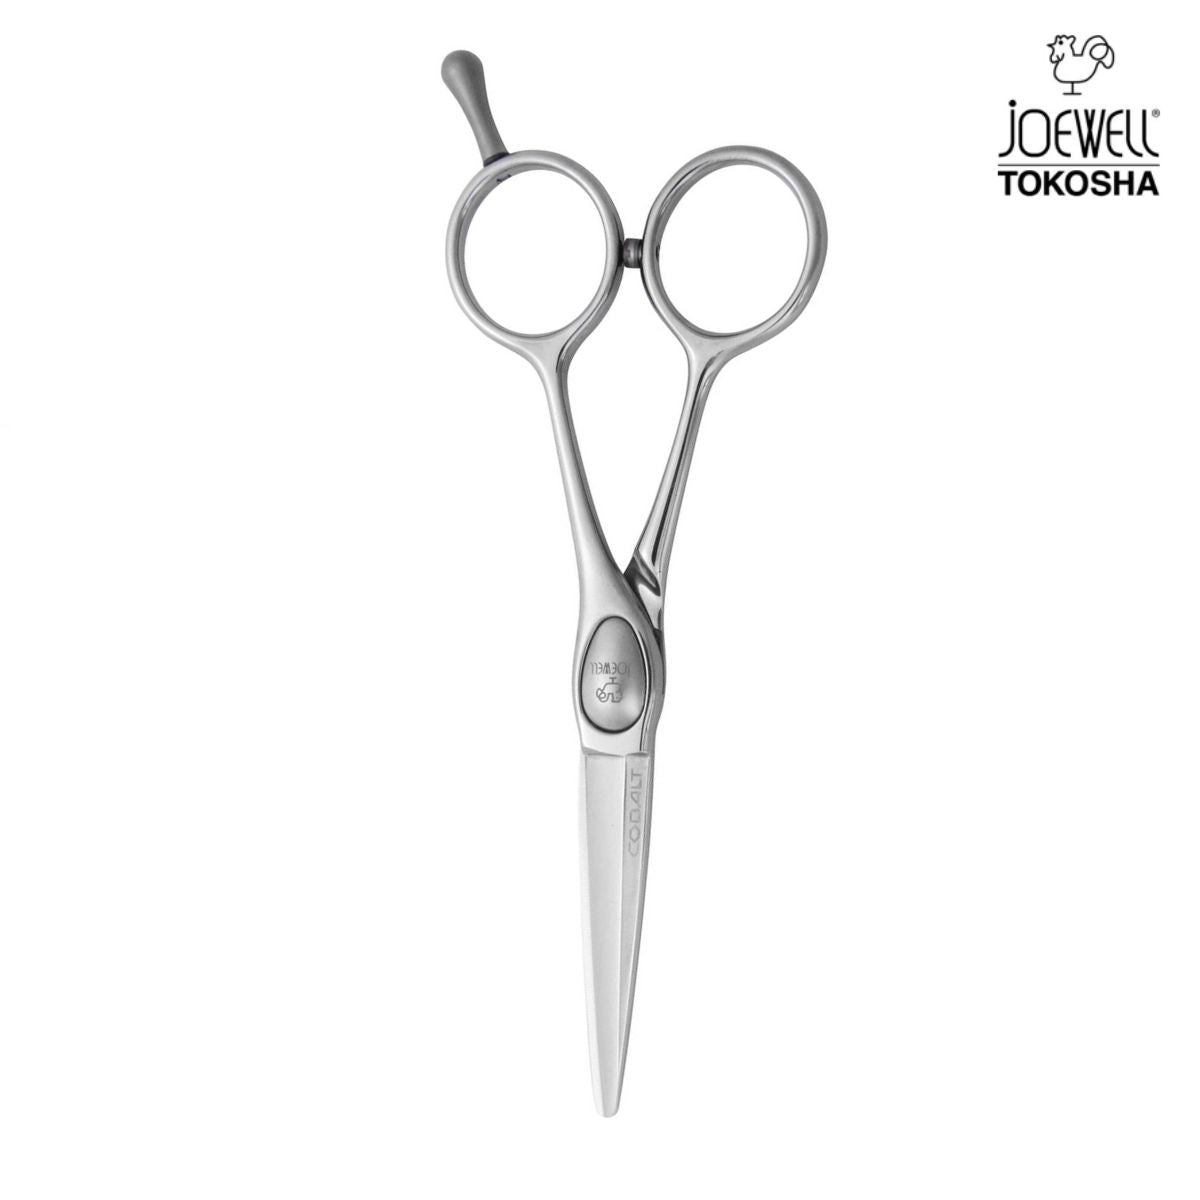 FXPRO 55 Super Alloy Genuine Joewell Professional Japanese Shears - from Hairart